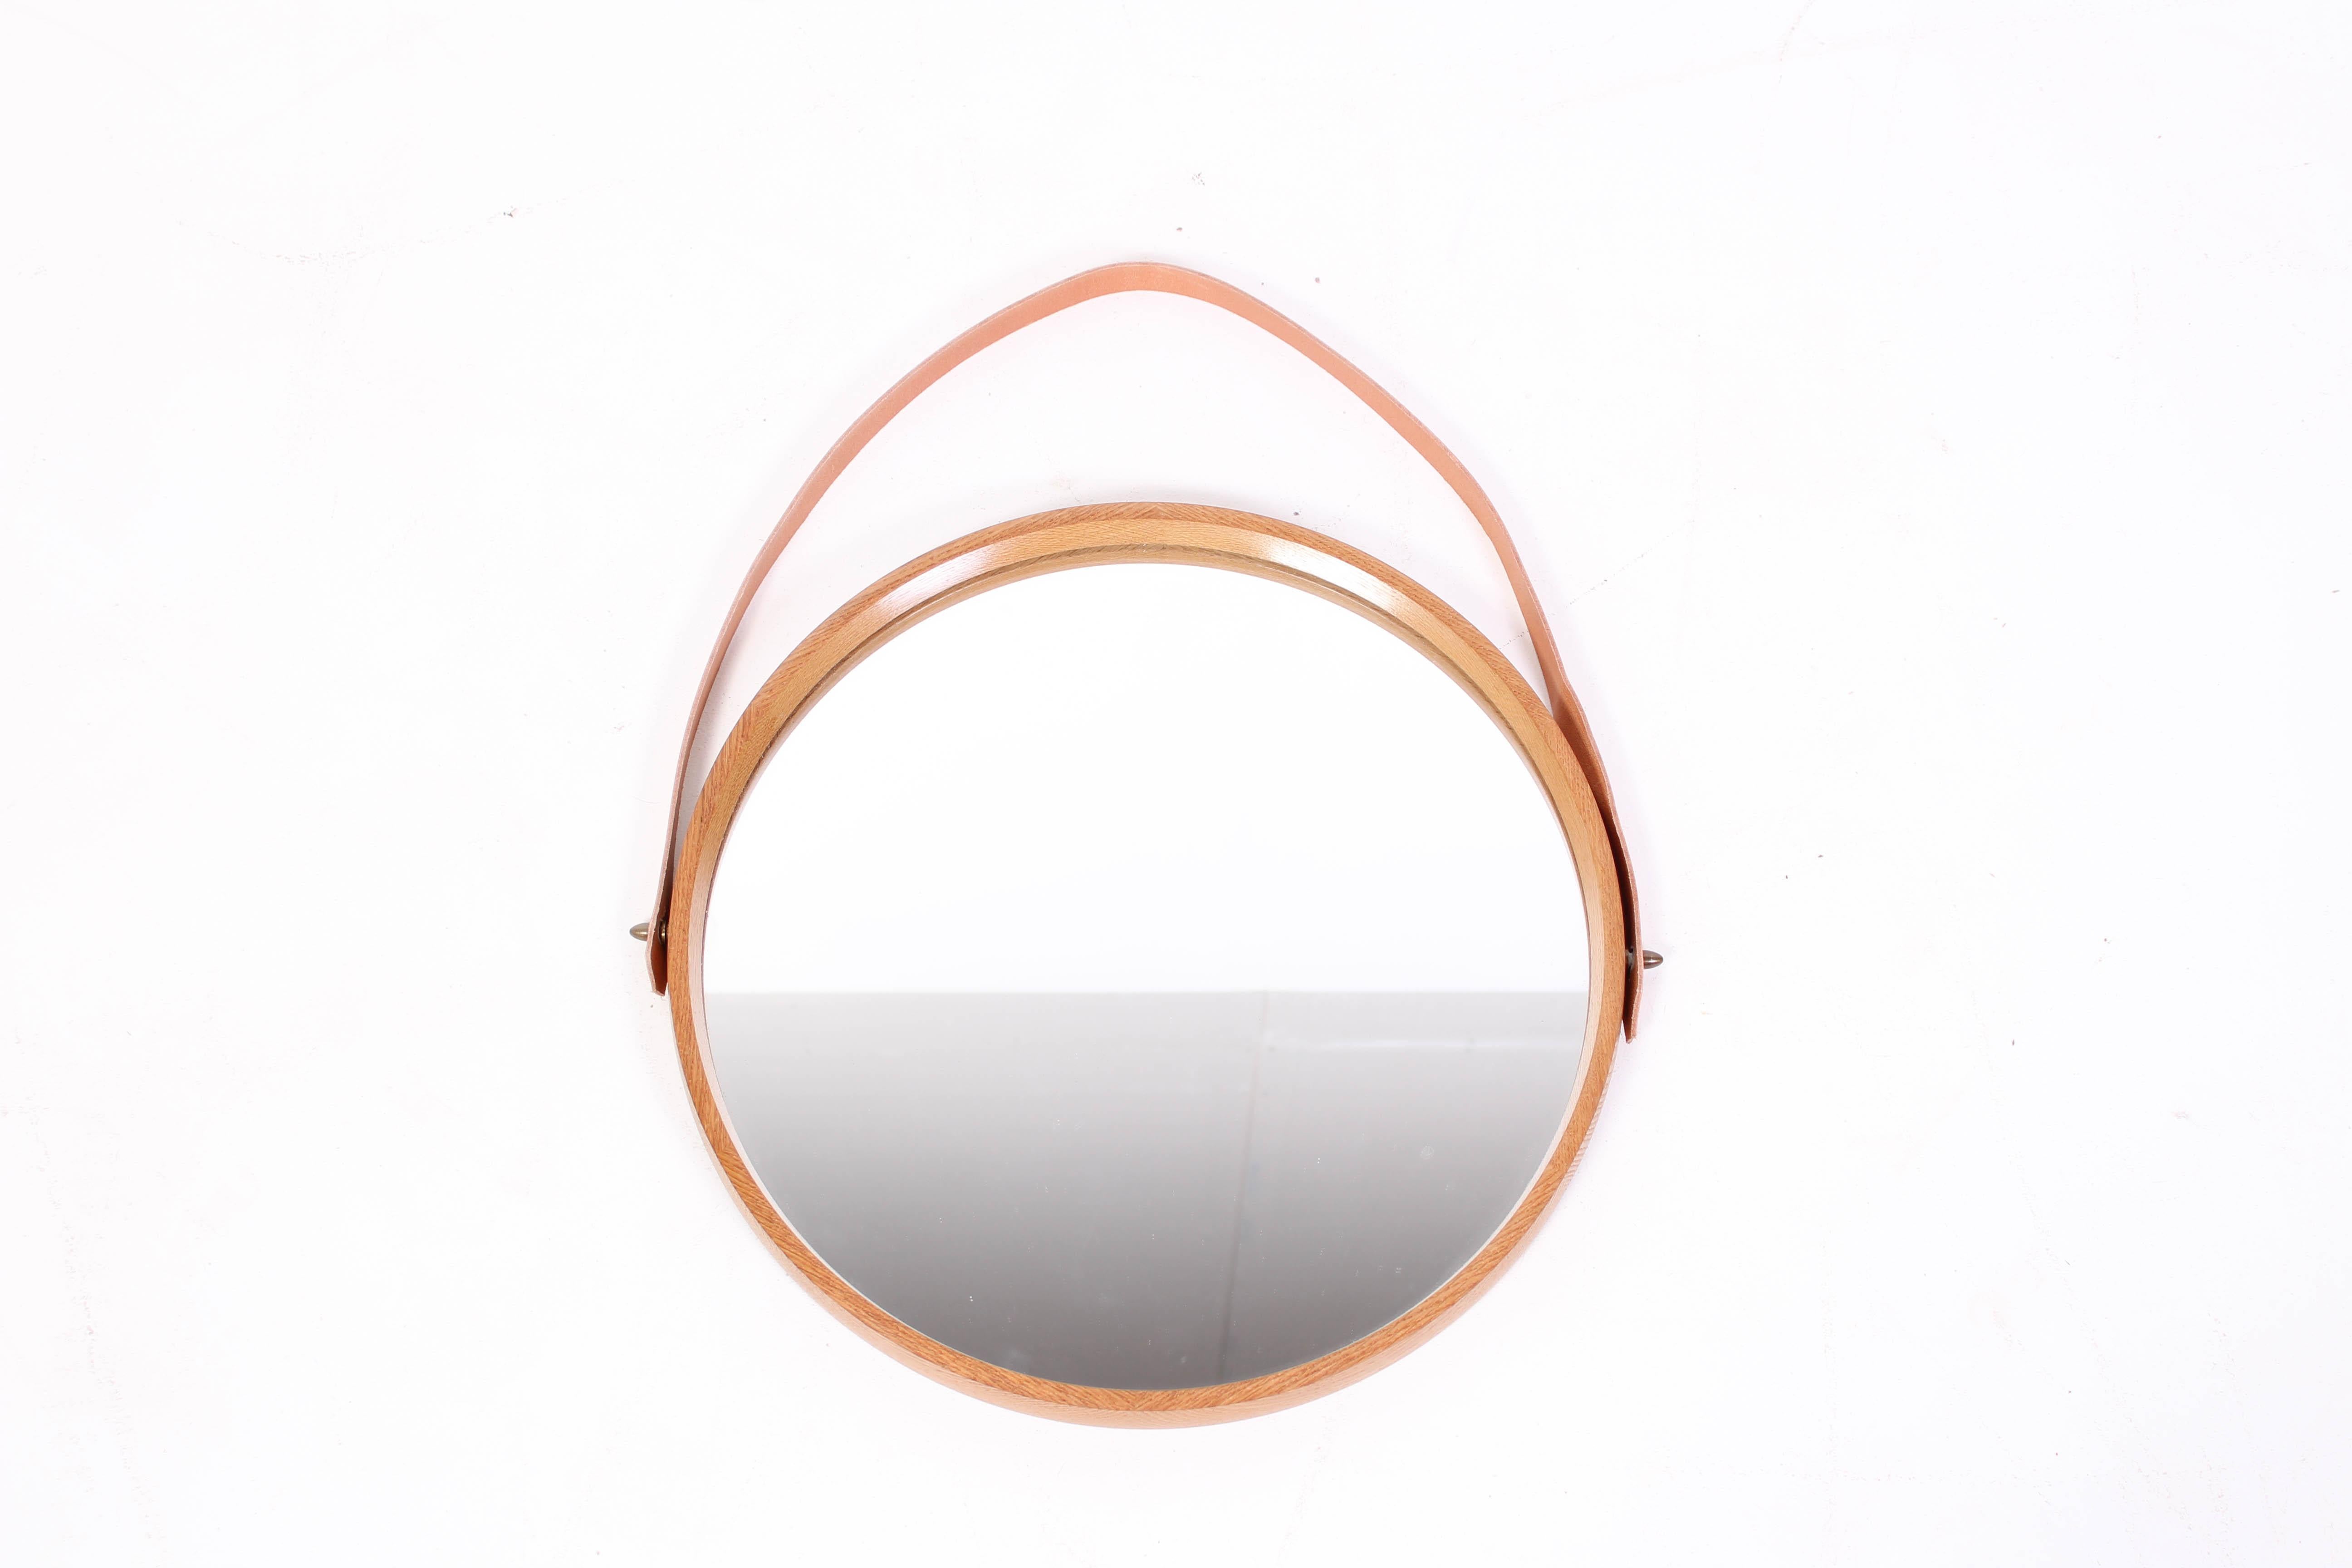 Midcentury oak mirror with leather strap and brass fittings by Uno & Östen Kristansson. The mirror was produced by their company Luxus from Vittsjö, Sweden.

Very good vintage condition, new leather strap.